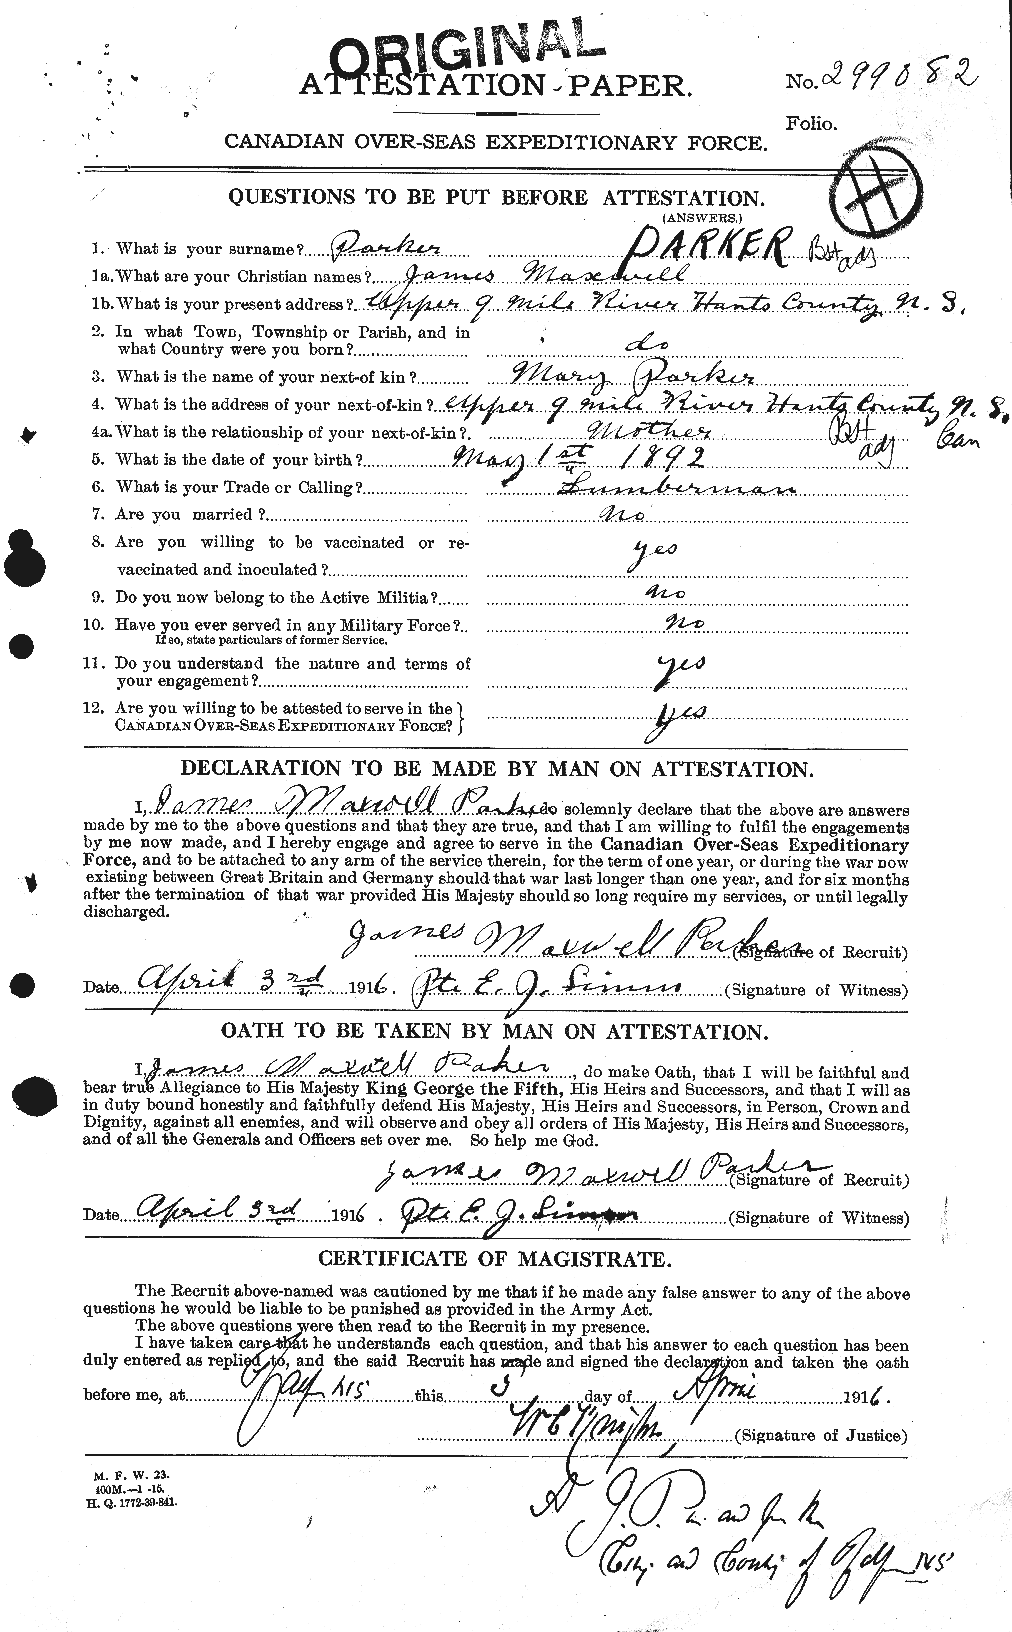 Personnel Records of the First World War - CEF 565436a